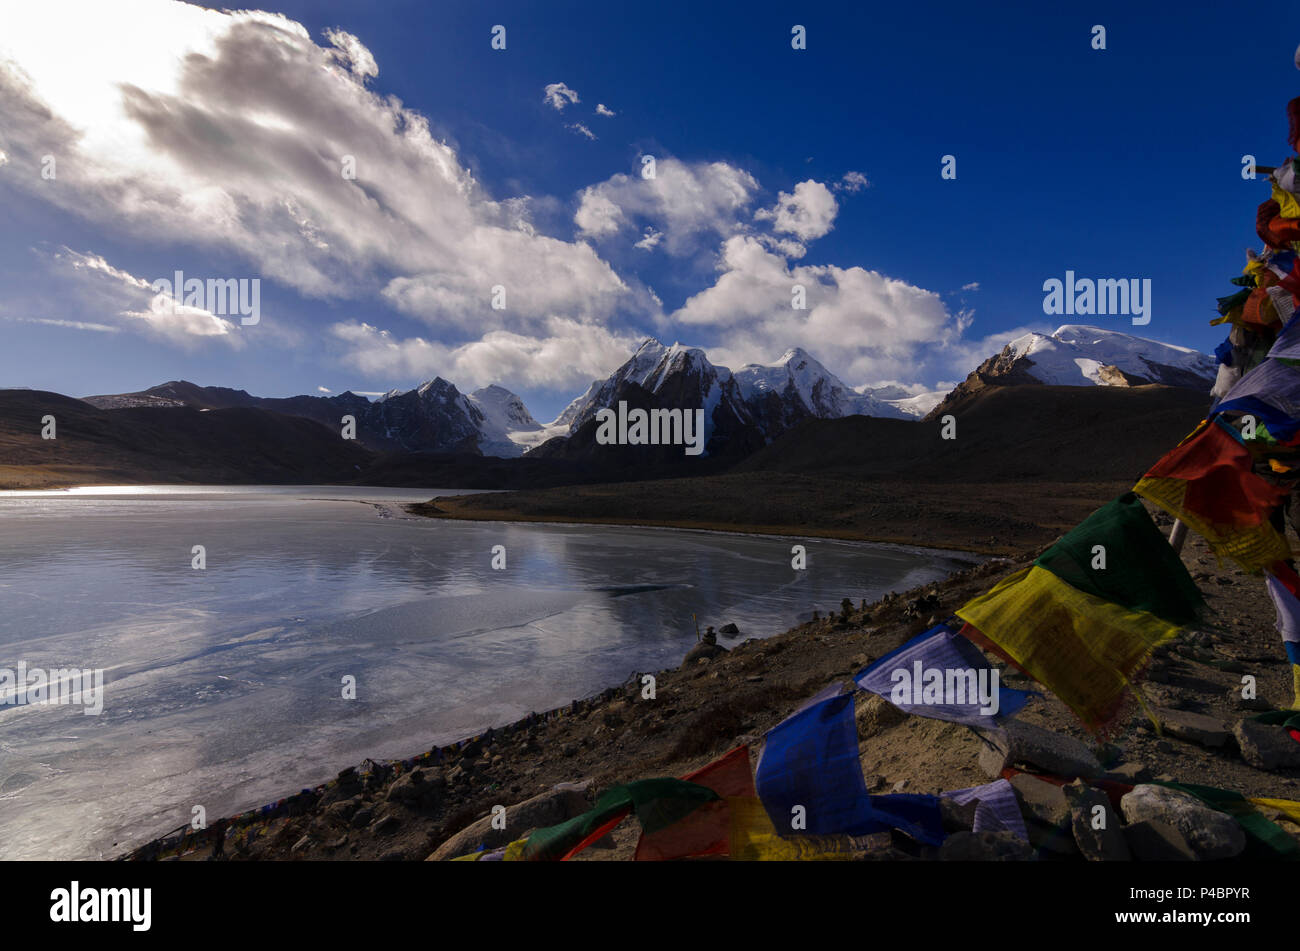 This is an image of Gurudongmar lake as the lake started to freeze at the onset of winter. Stock Photo